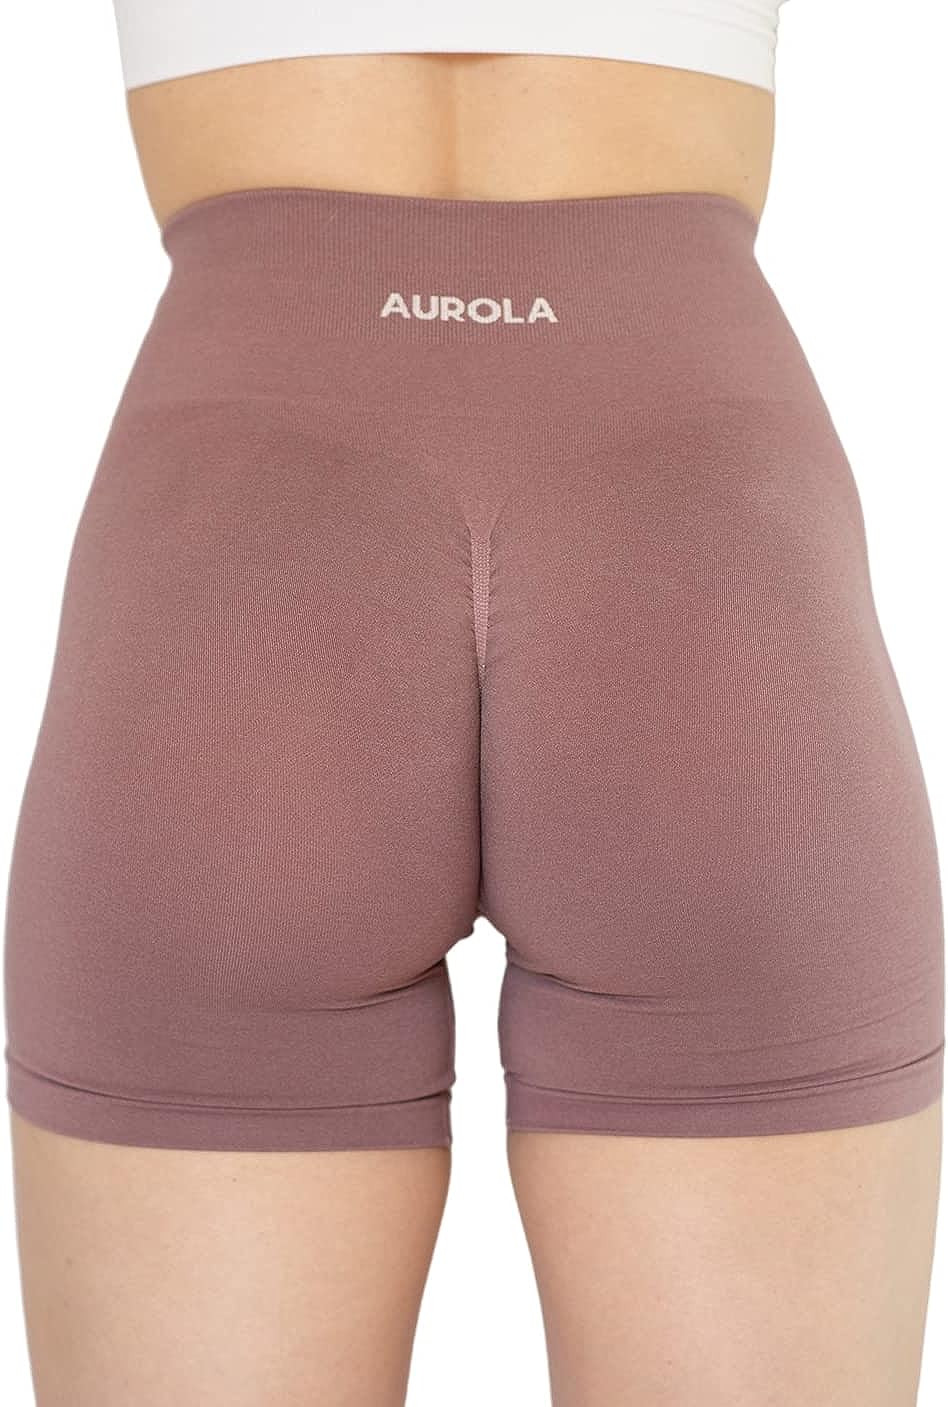 AUROLA Intensify Workout Shorts for Women Seamless Scrunch Short Gym Yoga  Running Sport Active Exercise Fitness Shorts Small Black